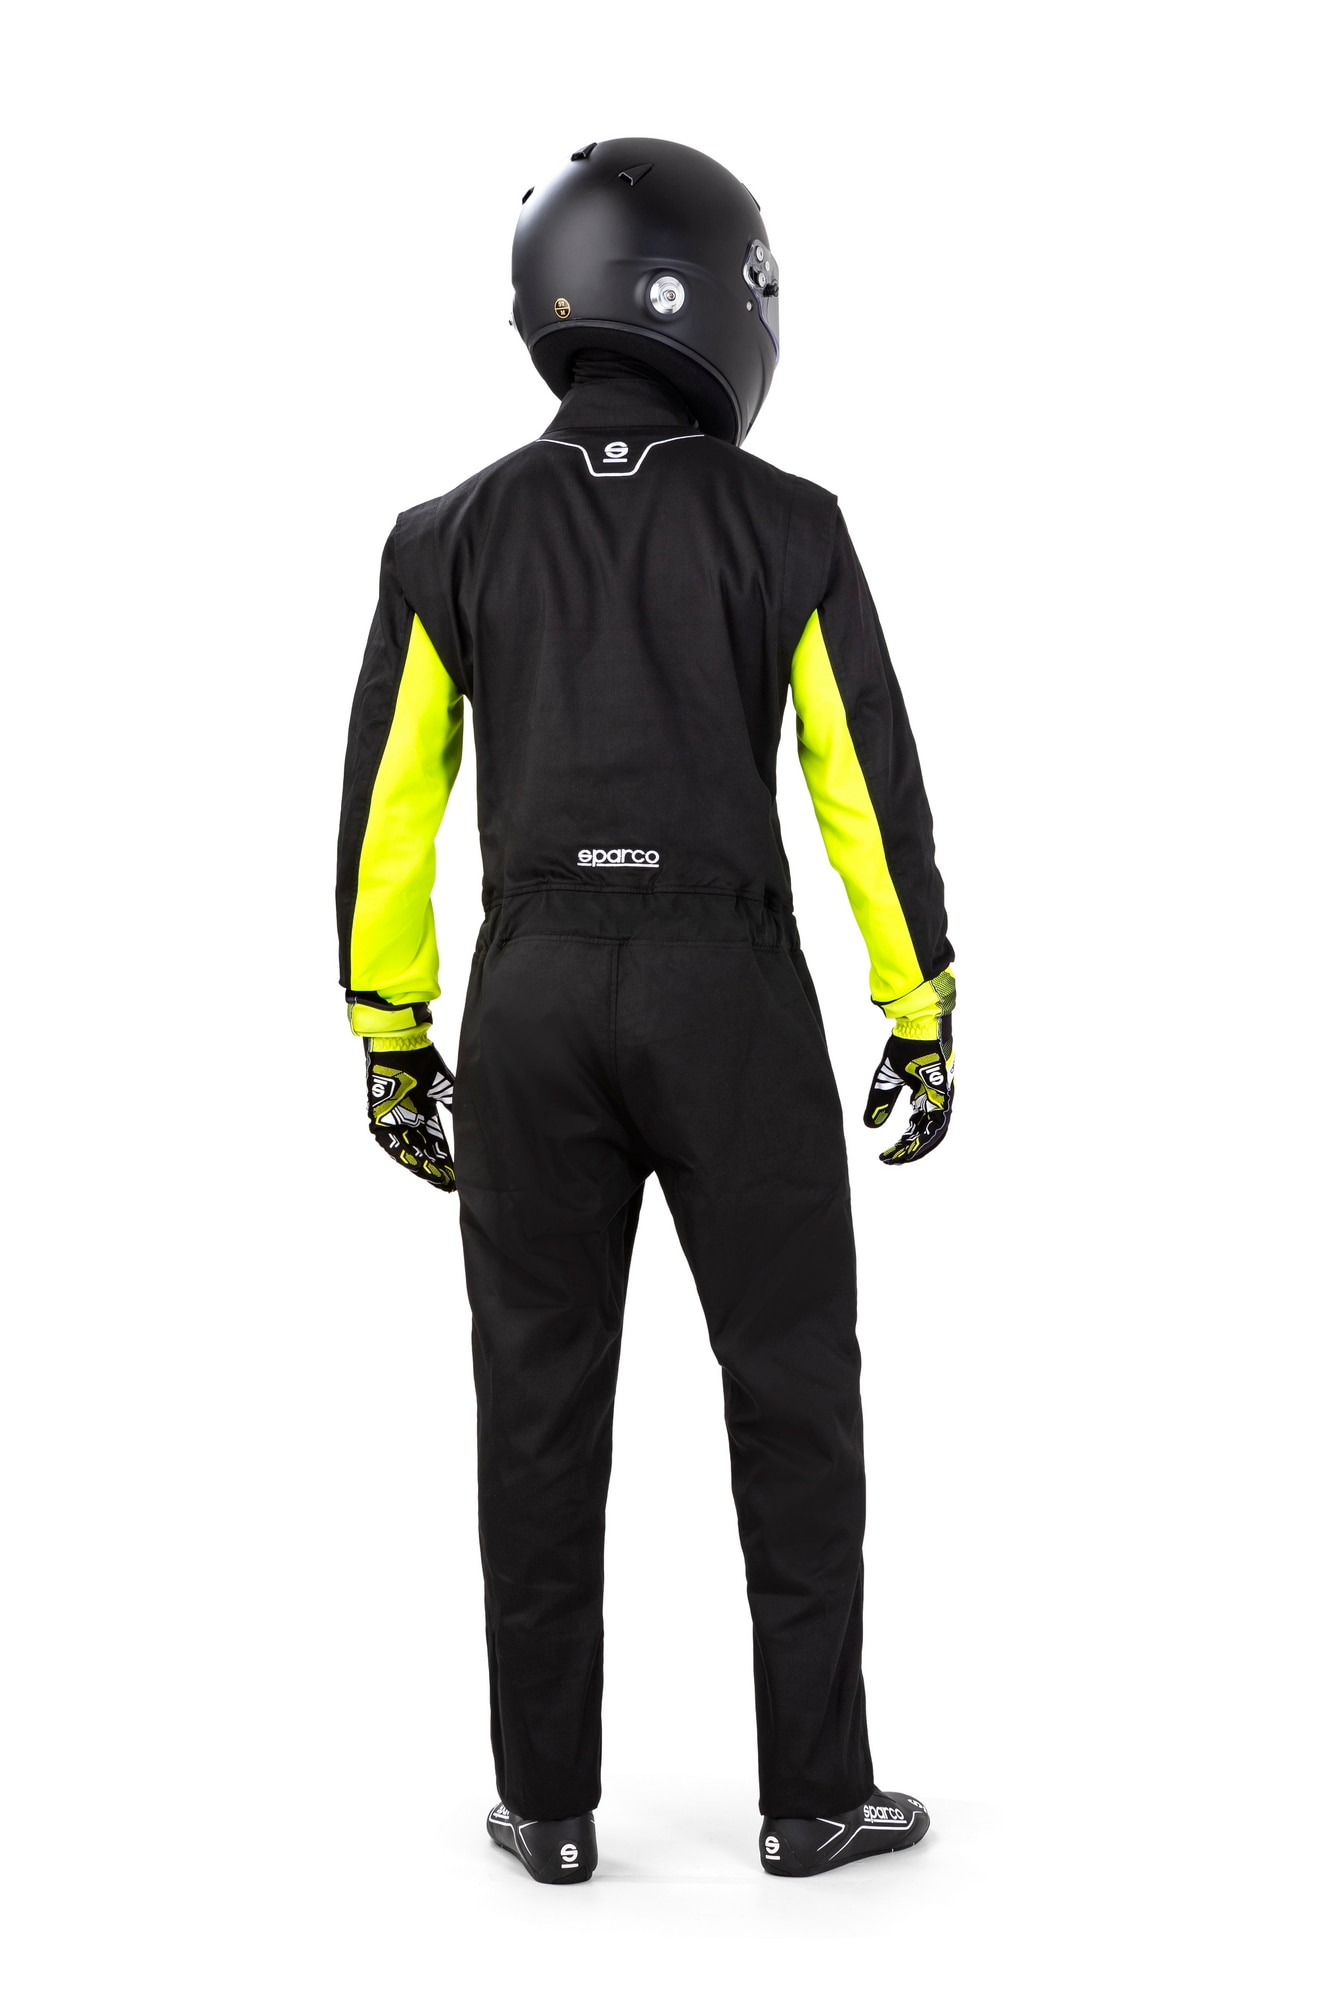 Karting Suit Sparco Rookie Black/Yellow